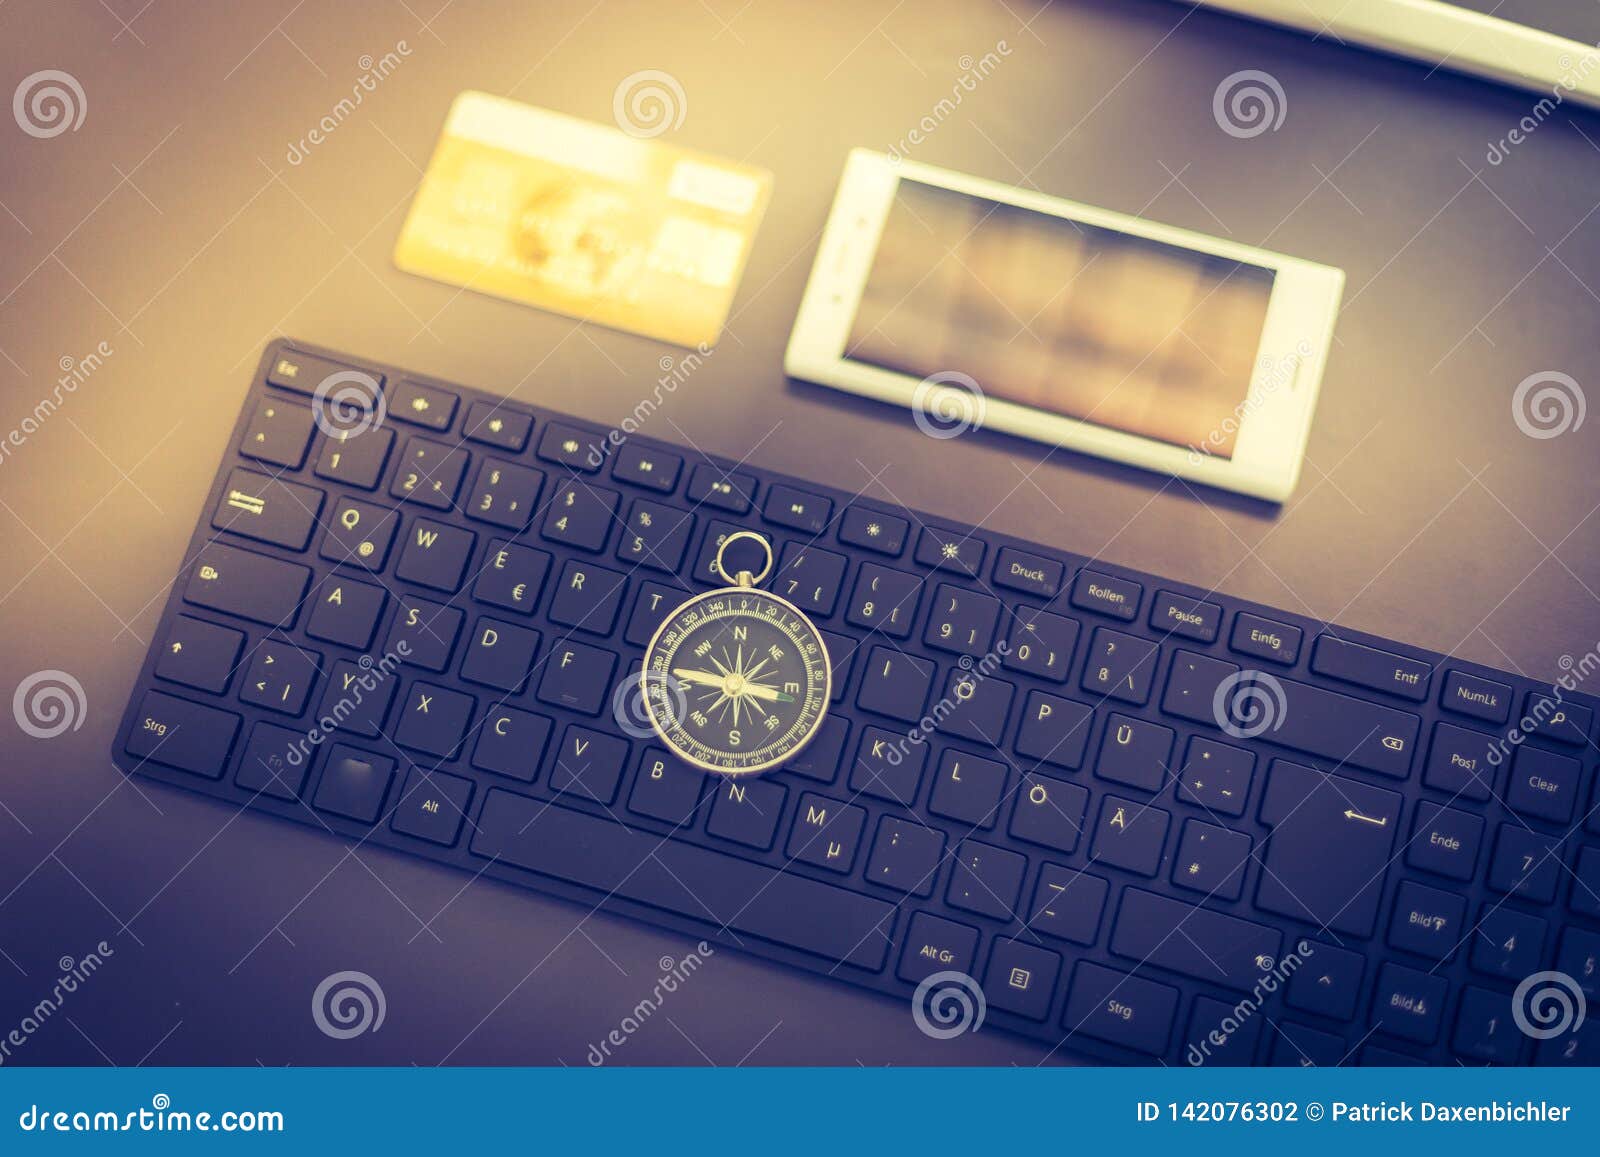 Web Business With Keyboard Compass Credit Card And Smartphone